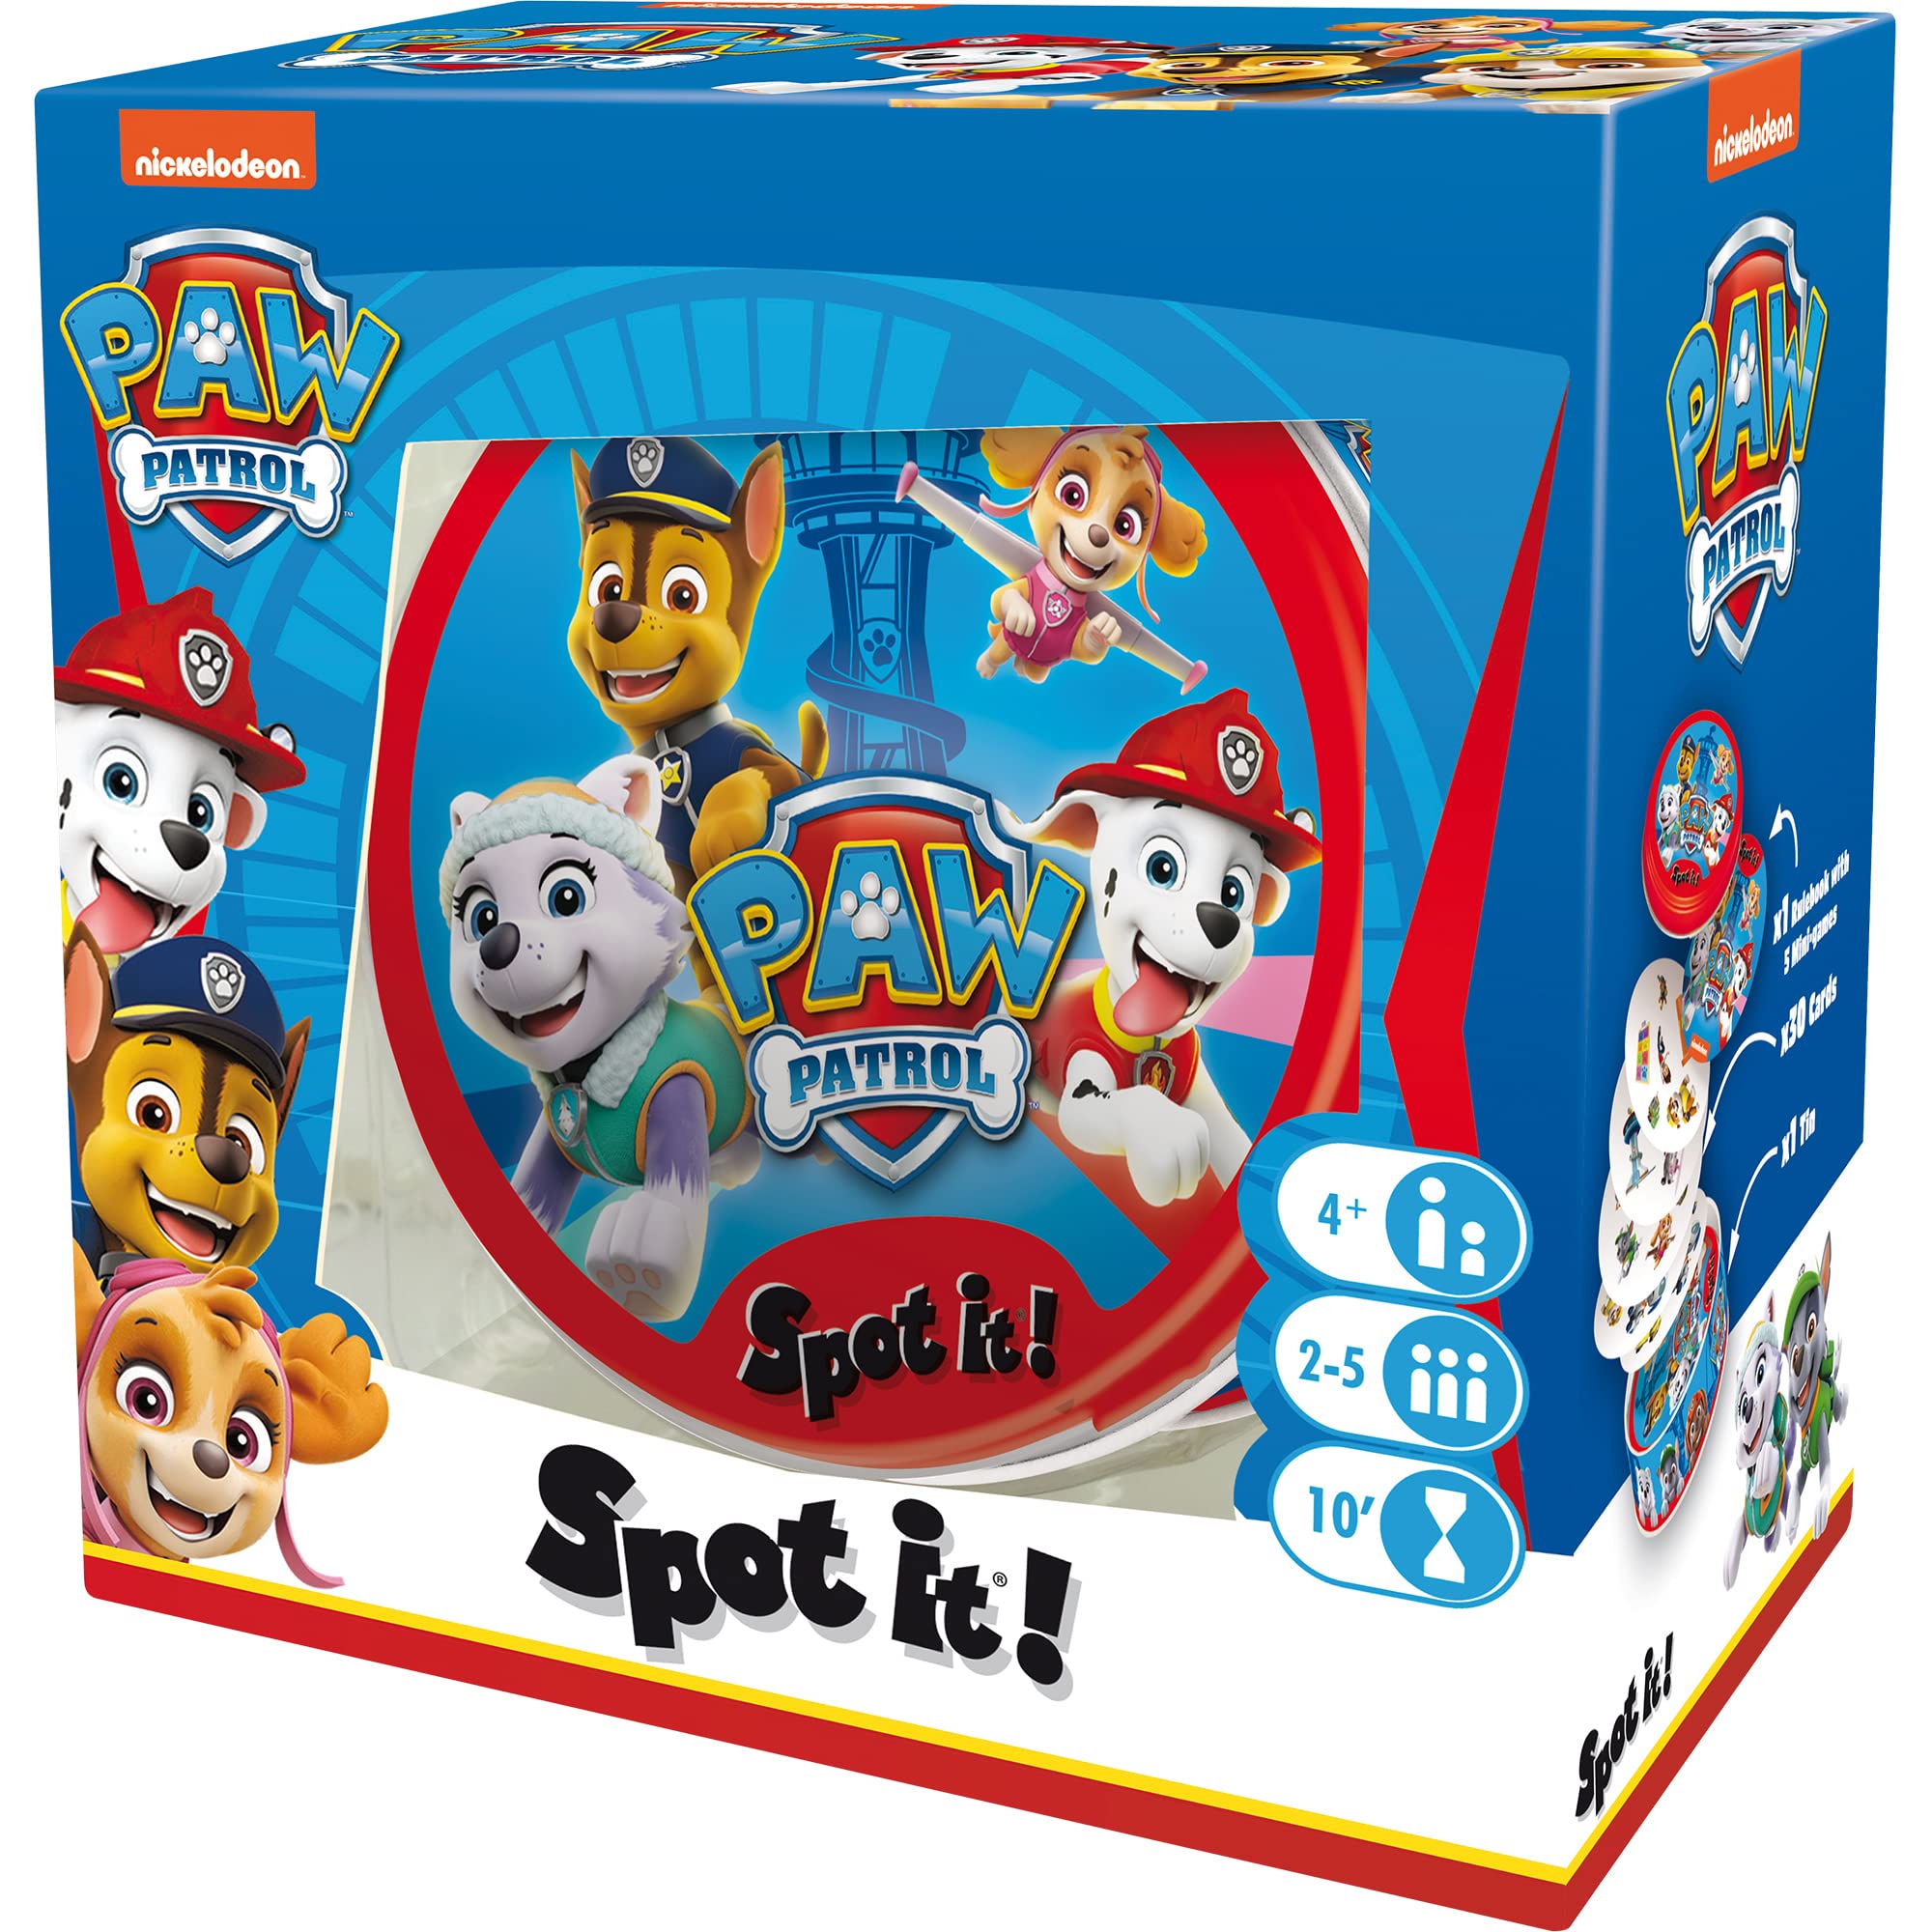 Zygomatic Spot It! Paw Patrol Card Game | Matching Game | Fun Kids Game for Family Game Night | Travel Game for Kids | Great Gift for Kids | Ages 4+ | 2-5 Players | Avg. Playtime 10 Mins | Made